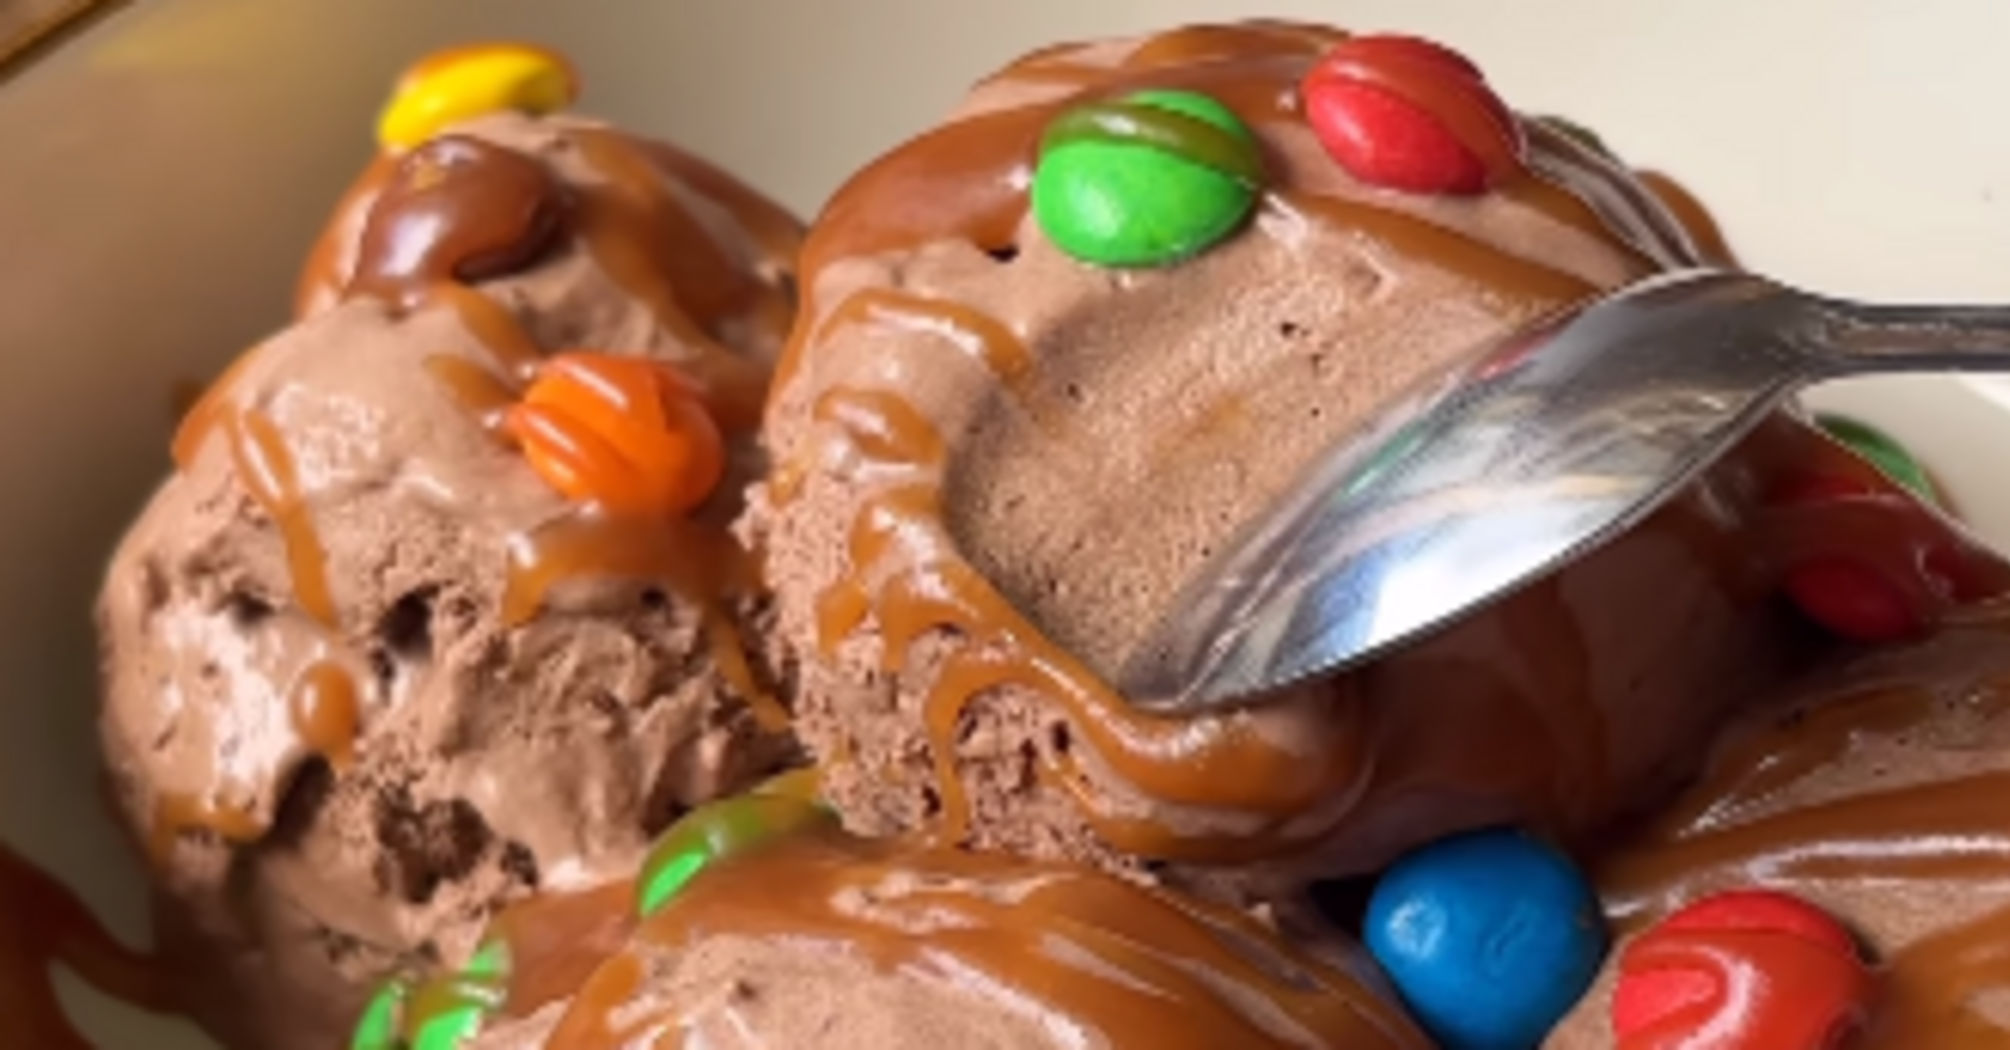 Homemade chocolate ice cream with salted caramel and M&M's